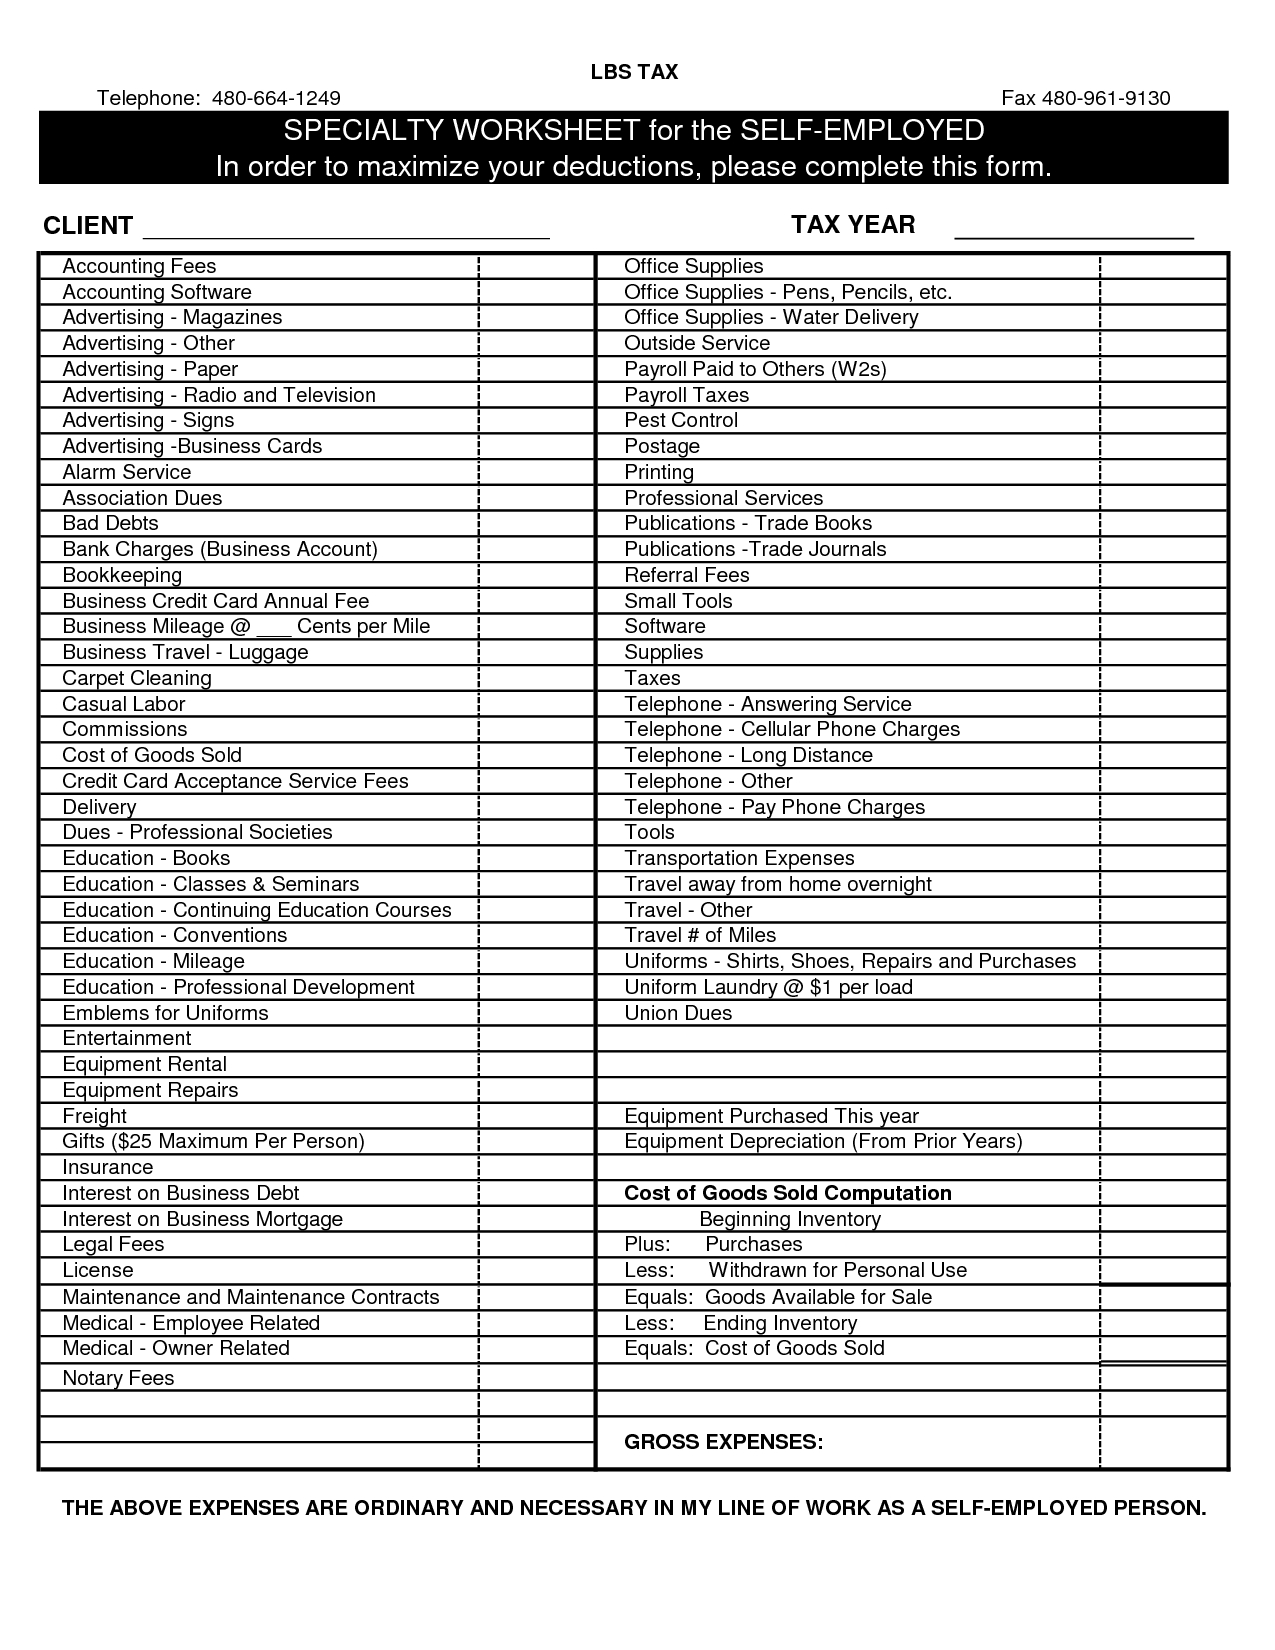 2016 Self Employment Tax And Deduction Worksheet – 7Th Grade